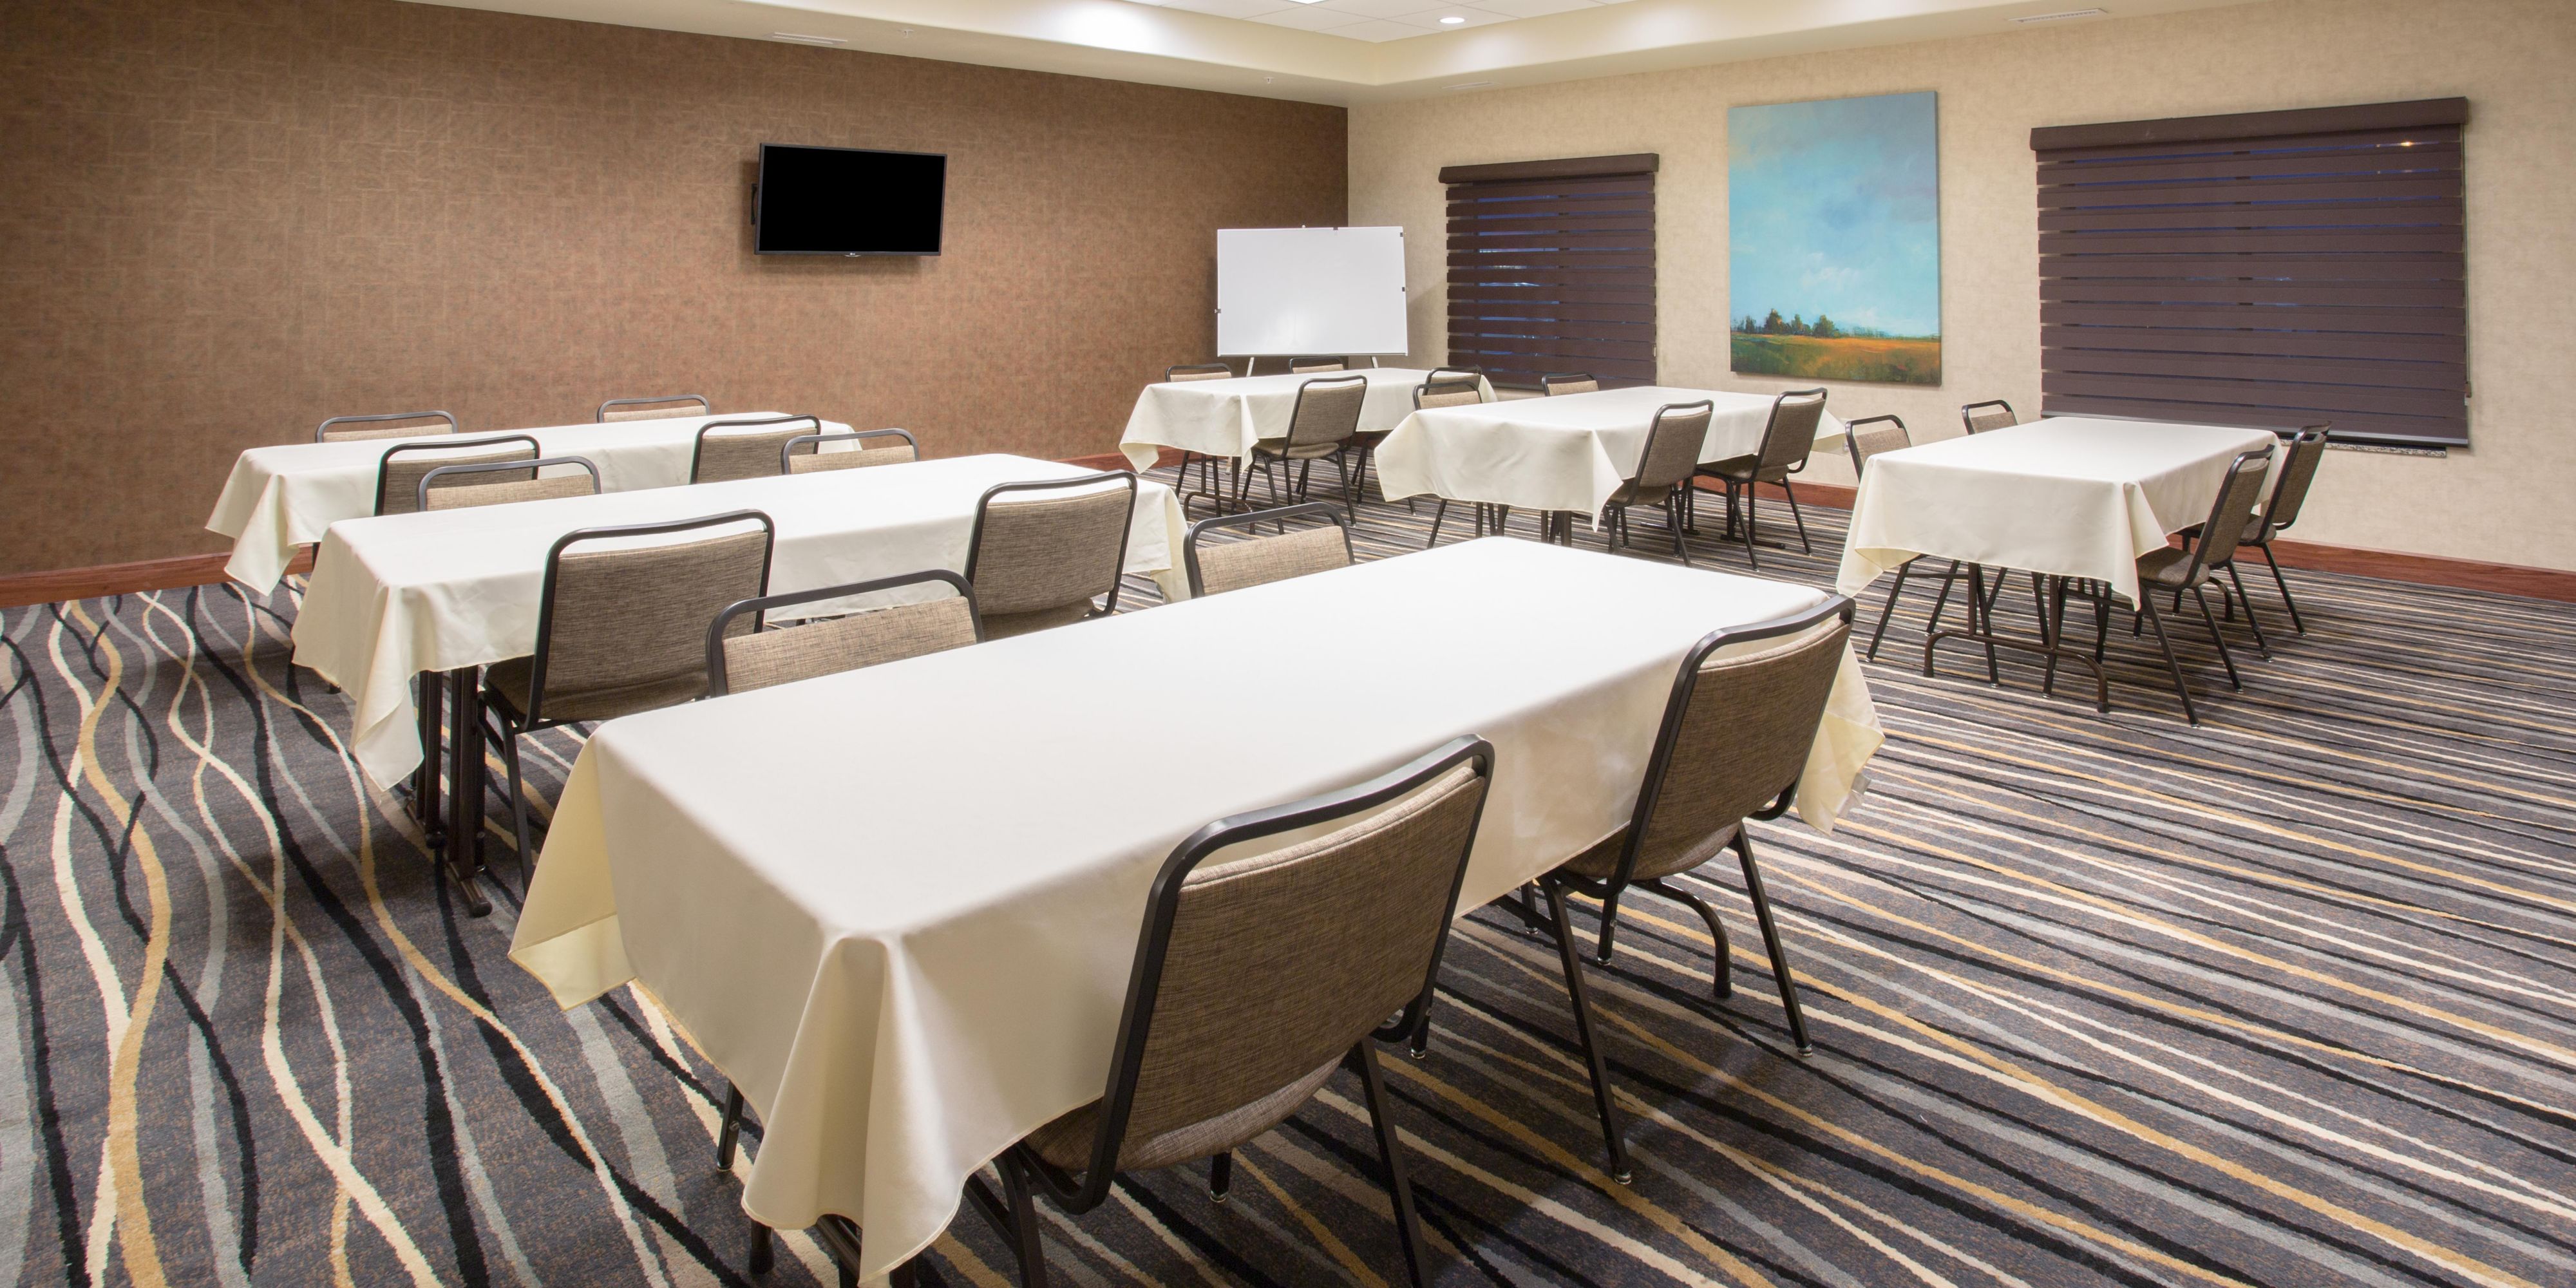 The Holiday Inn Express and Suites Glendive's meeting room is perfect for your needs.  The space holds up to 44 people and can be used for business meetings, conferences, family events and celebrations. 